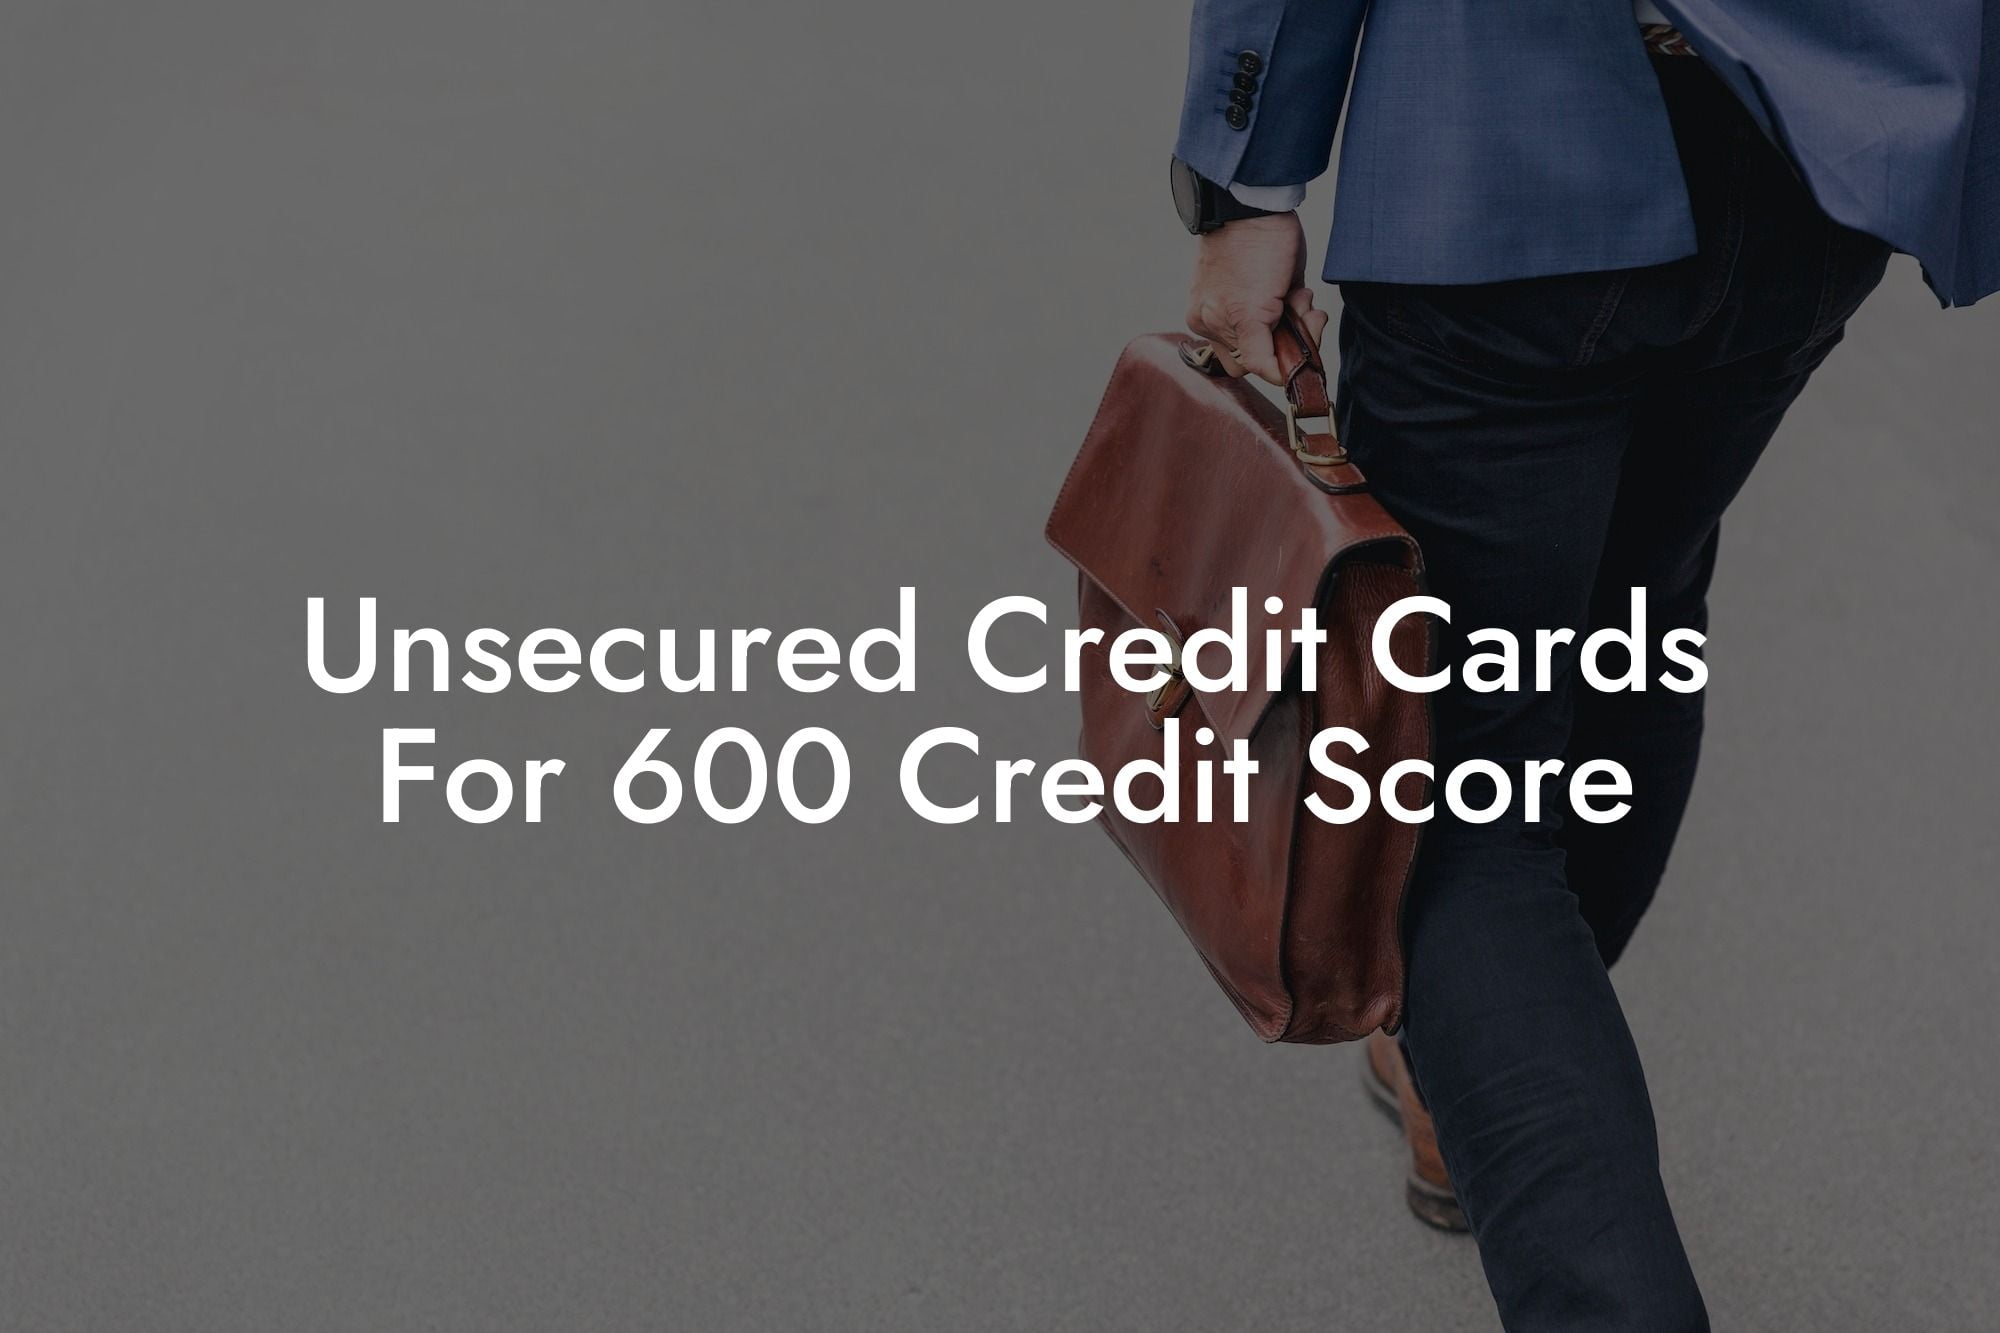 Unsecured Credit Cards For 600 Credit Score